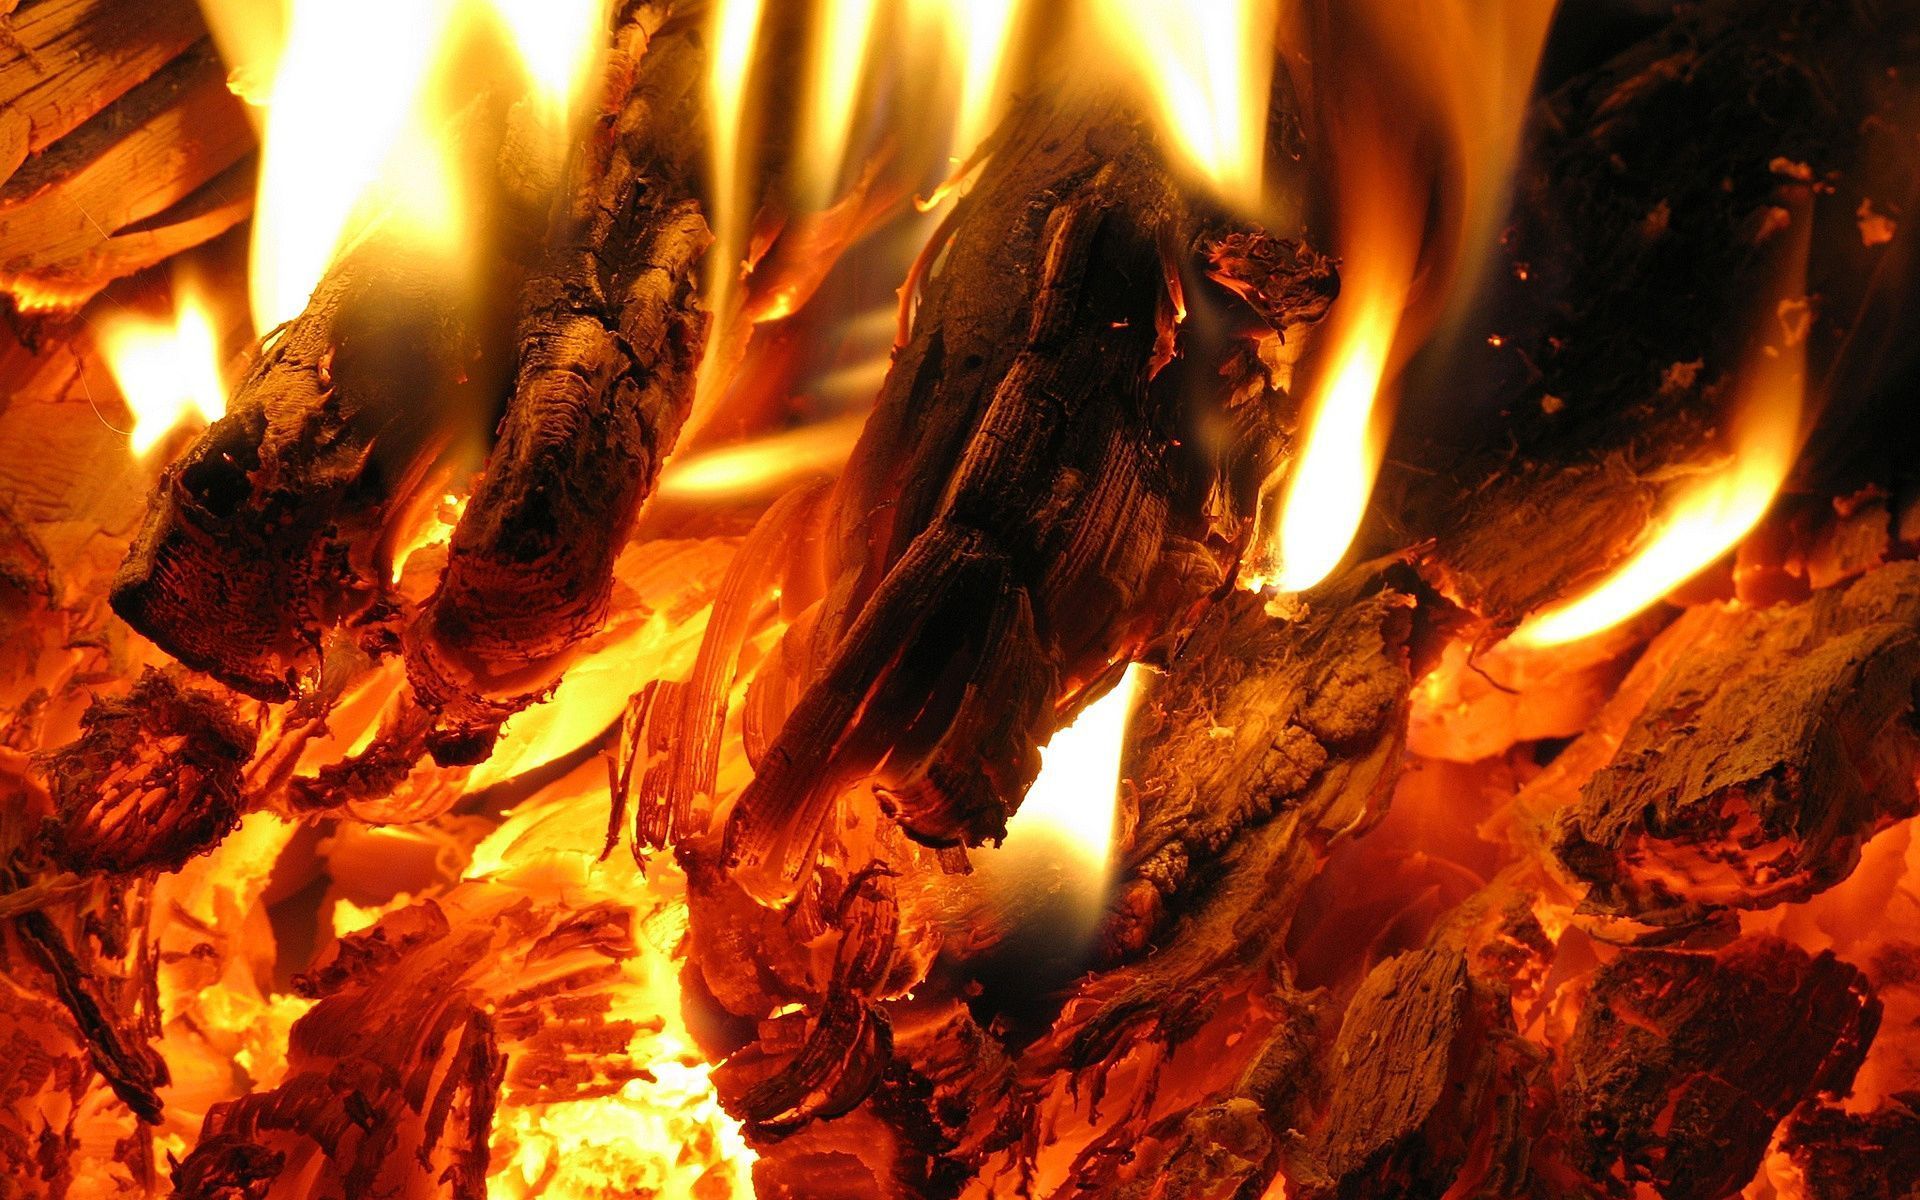 Fire, Flame wallpapers and images - wallpapers, pictures, photos